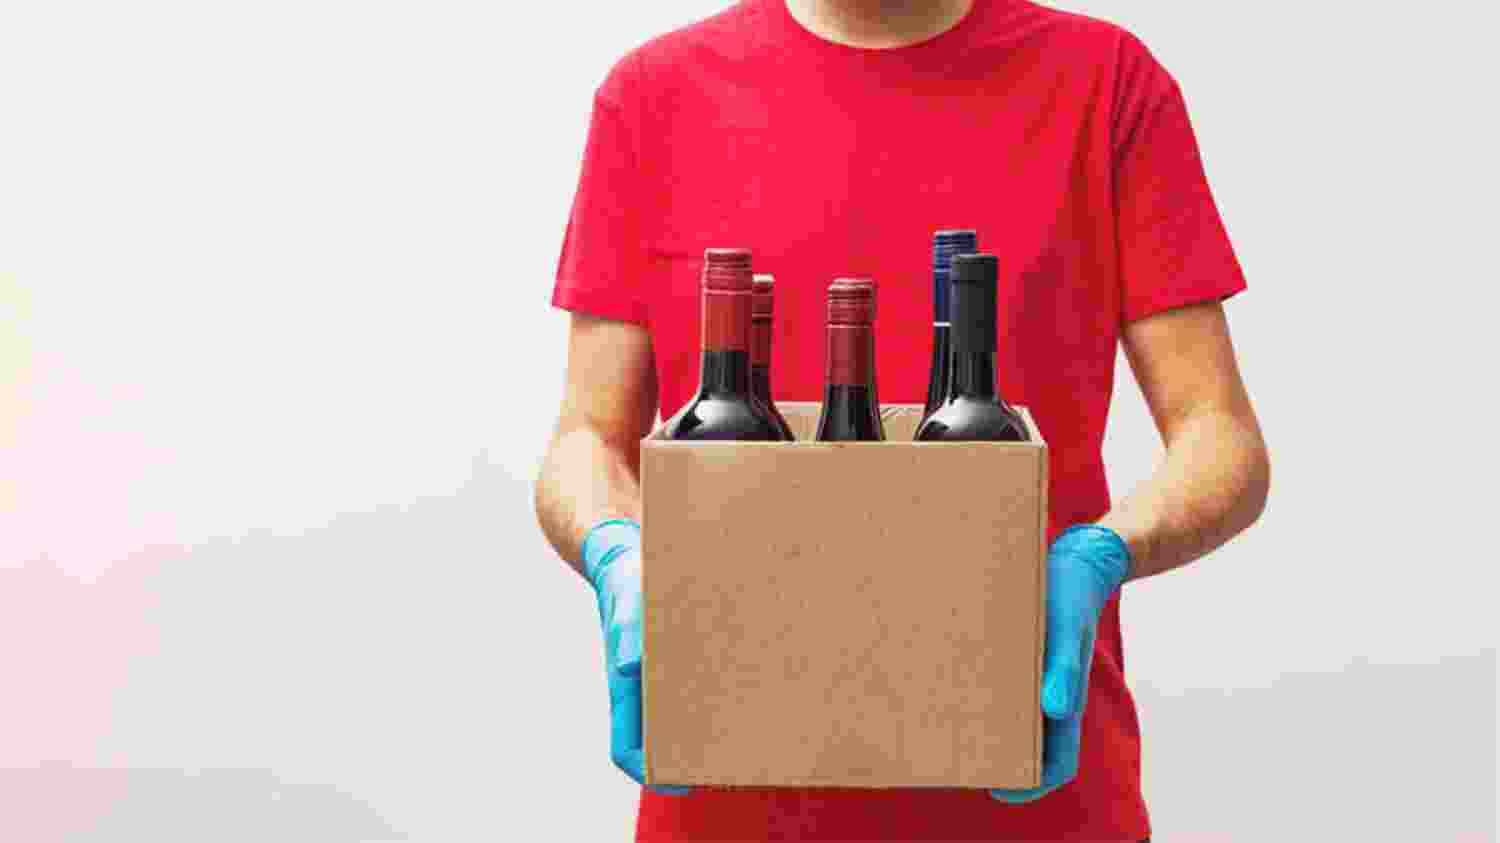 Swiggy, Zomato to offer online alcohol delivery soon